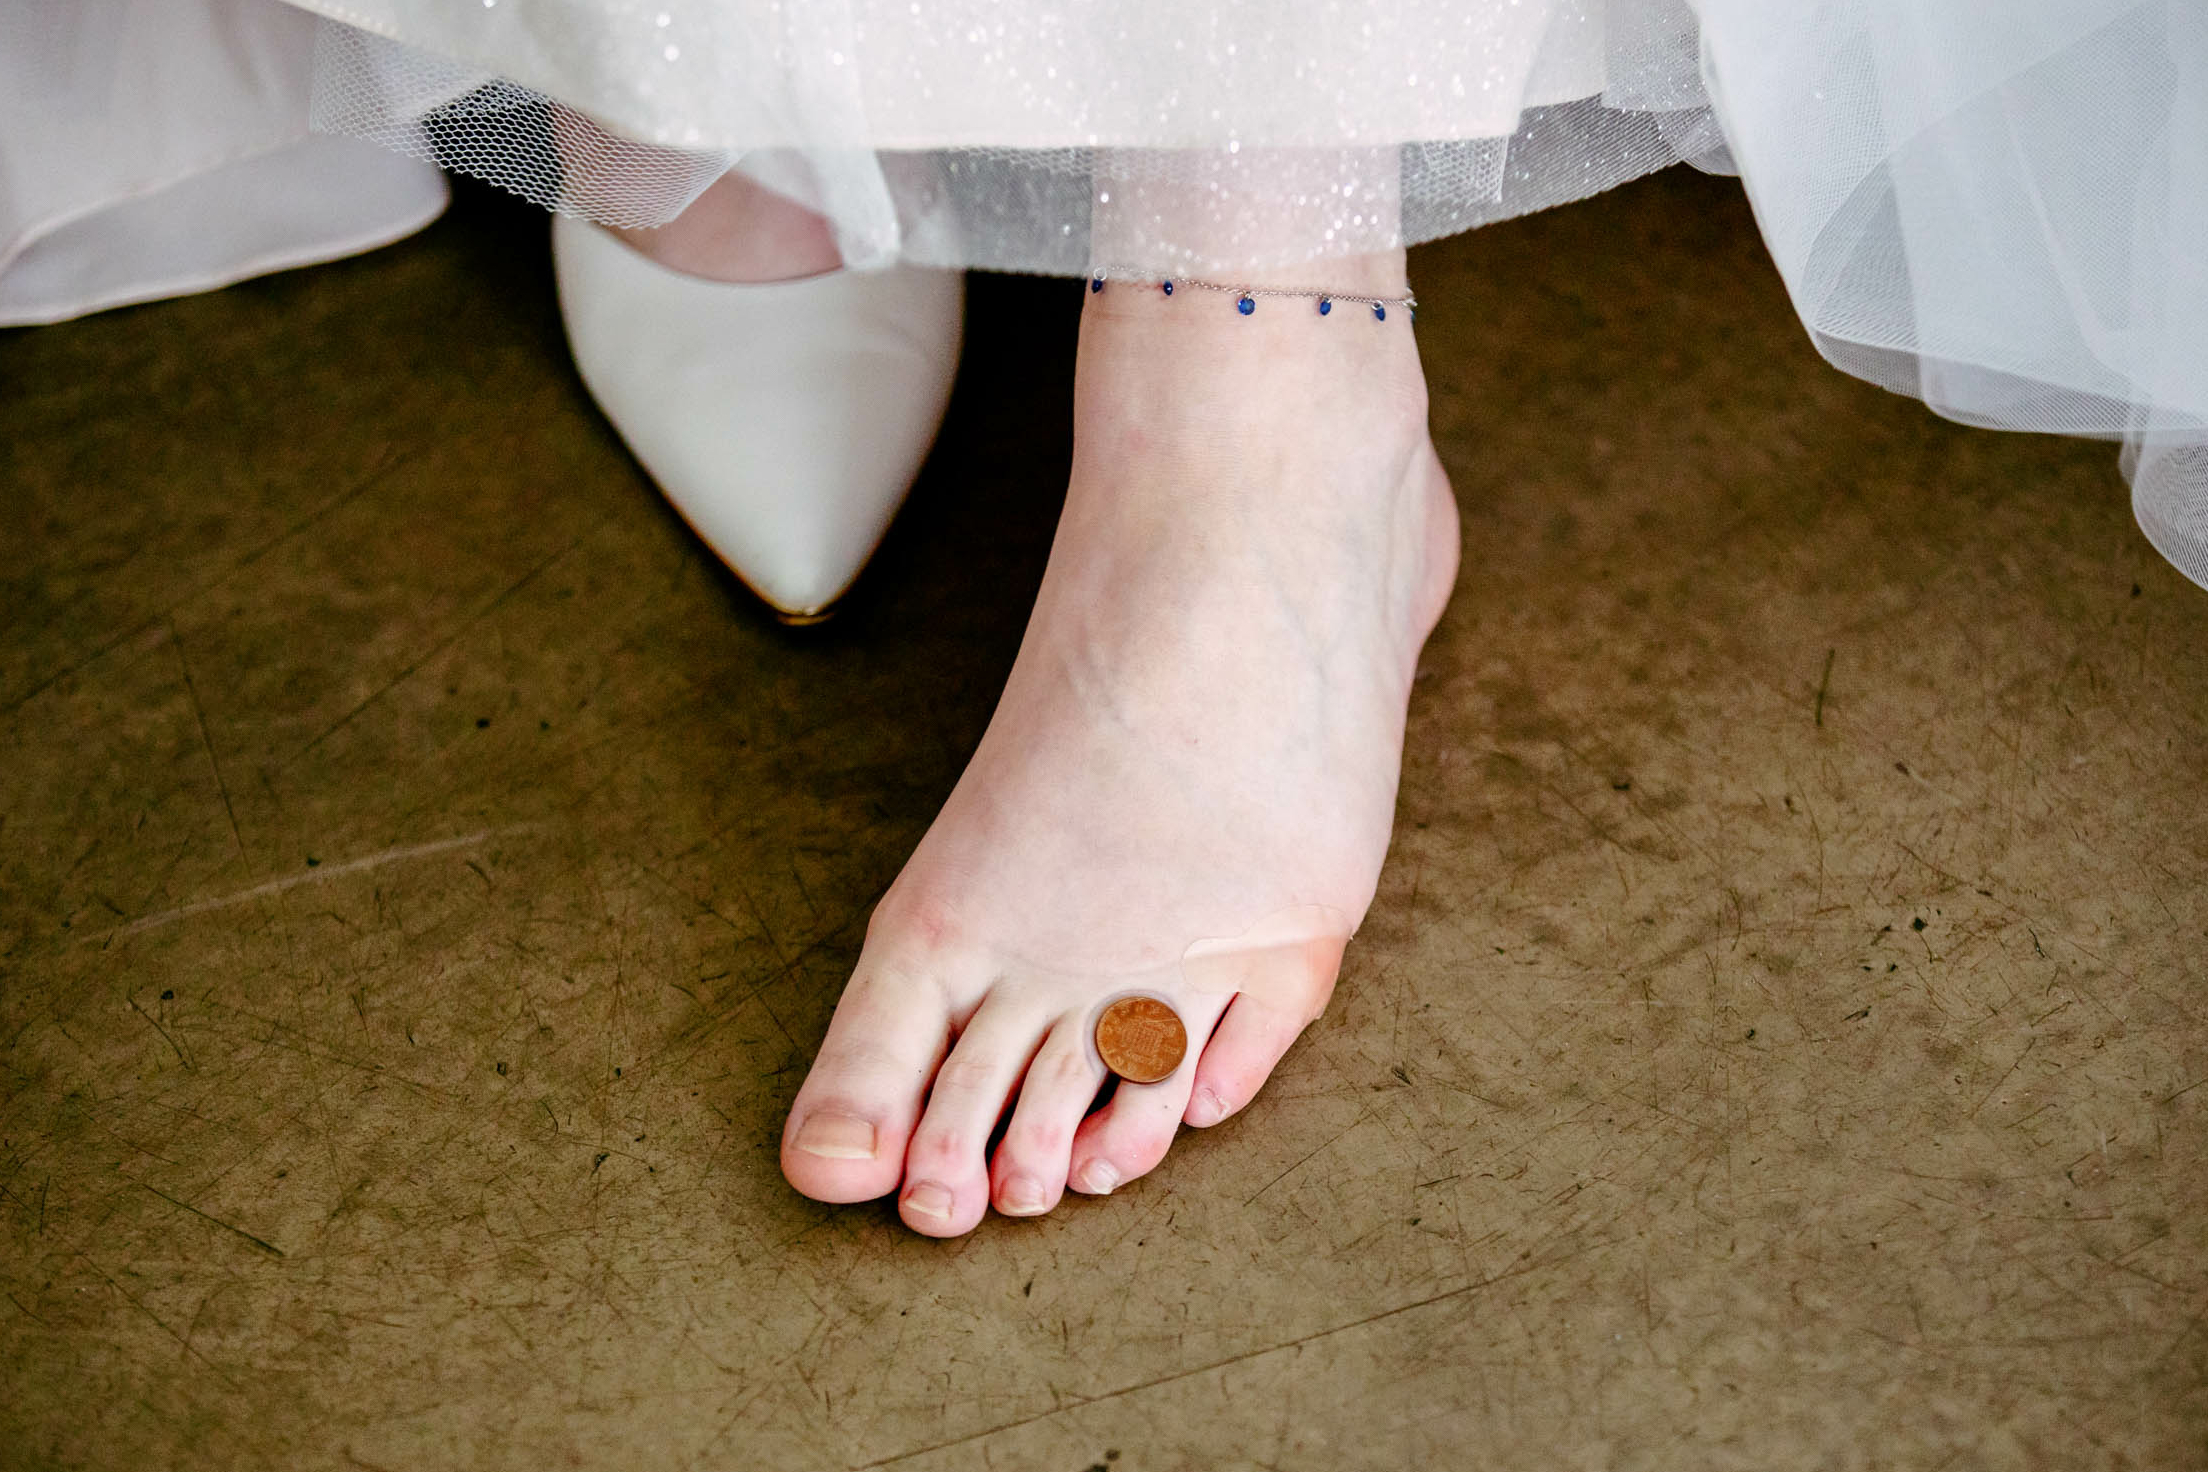 Something old, something new, something borrowed, something blue and a sixpence for her shoe.